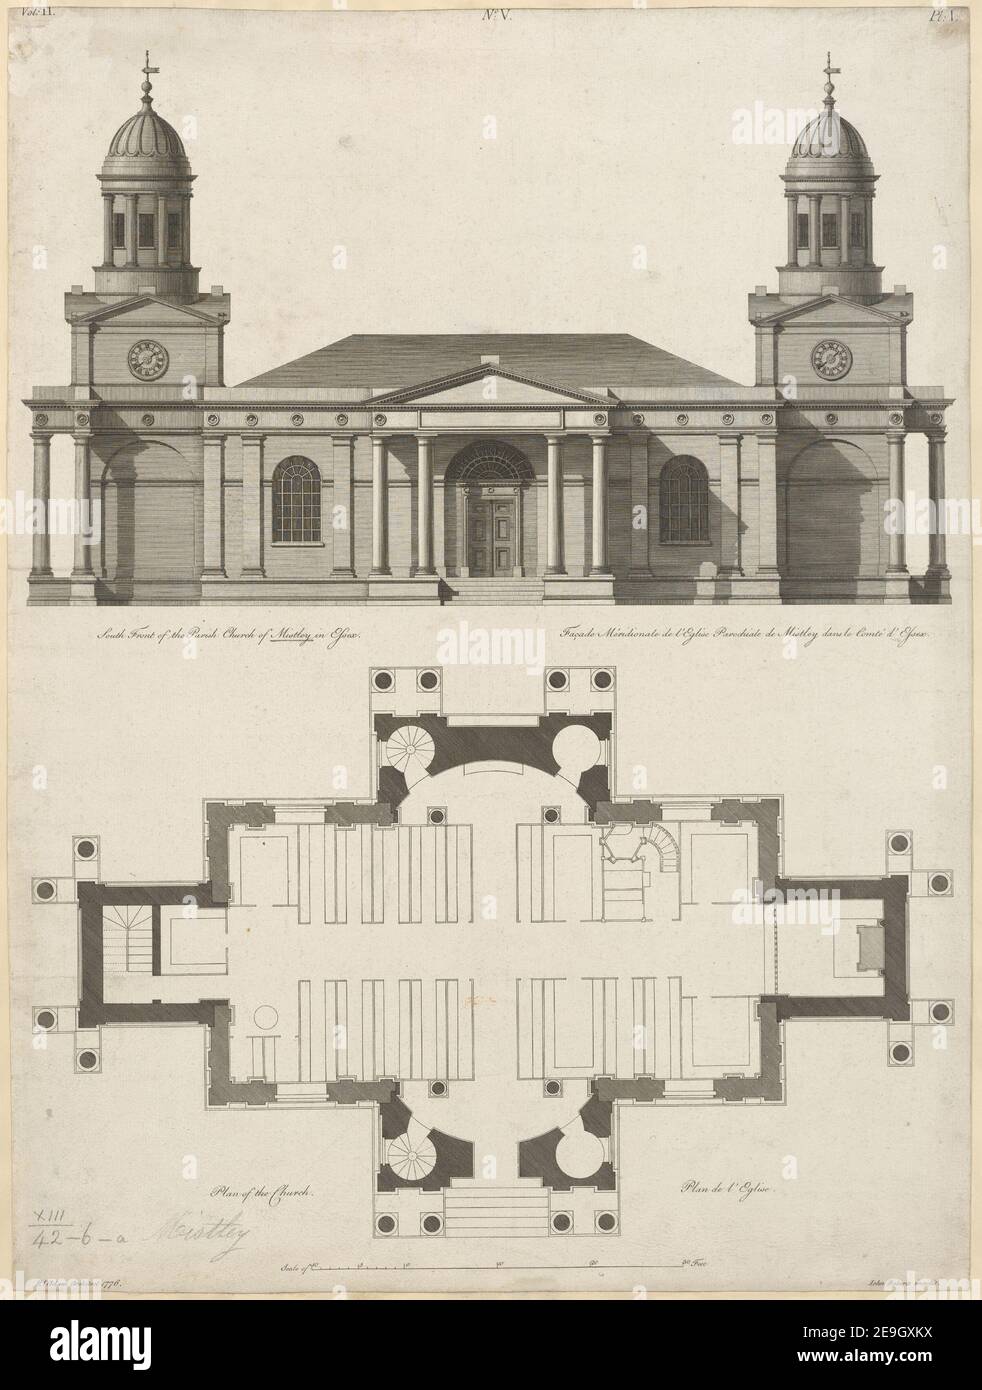 Elevation of one end of the Church at Mistley = EleÃÅvation d'un Bout de l'Eglise aÃÄ Mistley.  Author  Roberts, John 13.42.6.b. Place of publication: [London] Publisher: [R. Adam] Date of publication: [1778-1779 c.]  Item type: 1 print Medium: etching and engraving Dimensions: sheet 58.2 x 43.6 cm [trimmed within platemark]  Former owner: George III, King of Great Britain, 1738-1820 Stock Photo